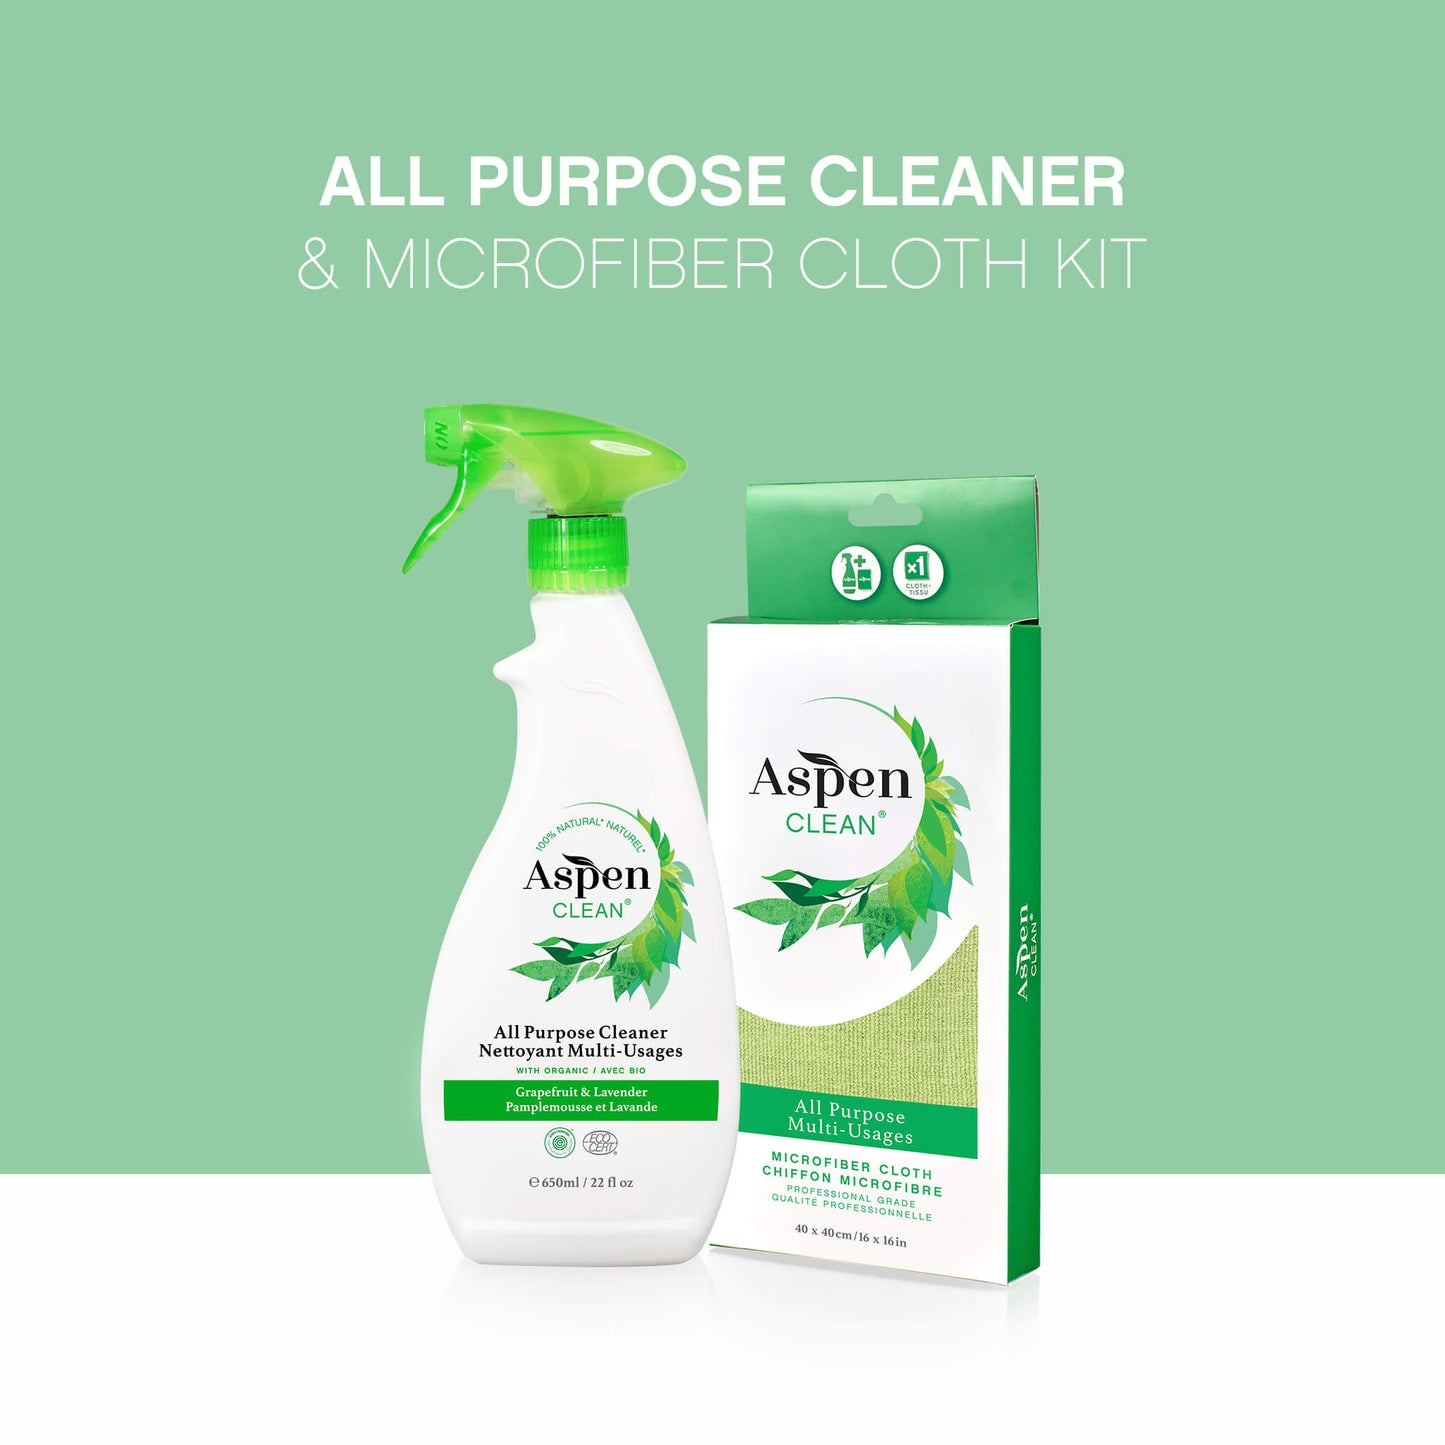 All Purpose Cleaner and Microfiber Cloth Kit